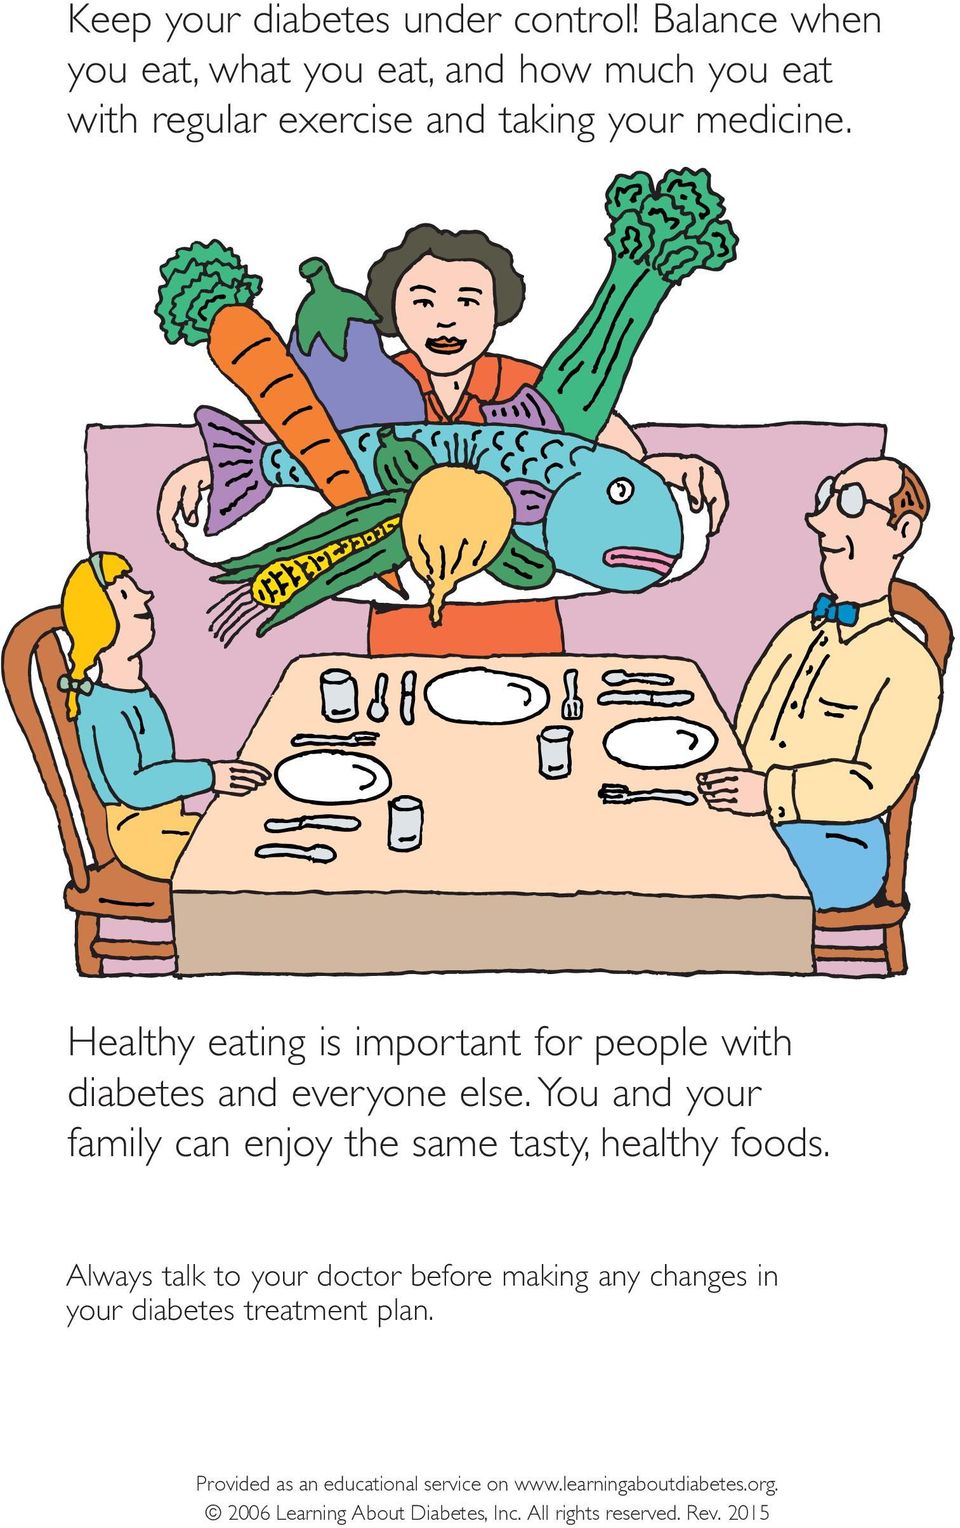 Healthy eating is important for people with diabetes and everyone else.